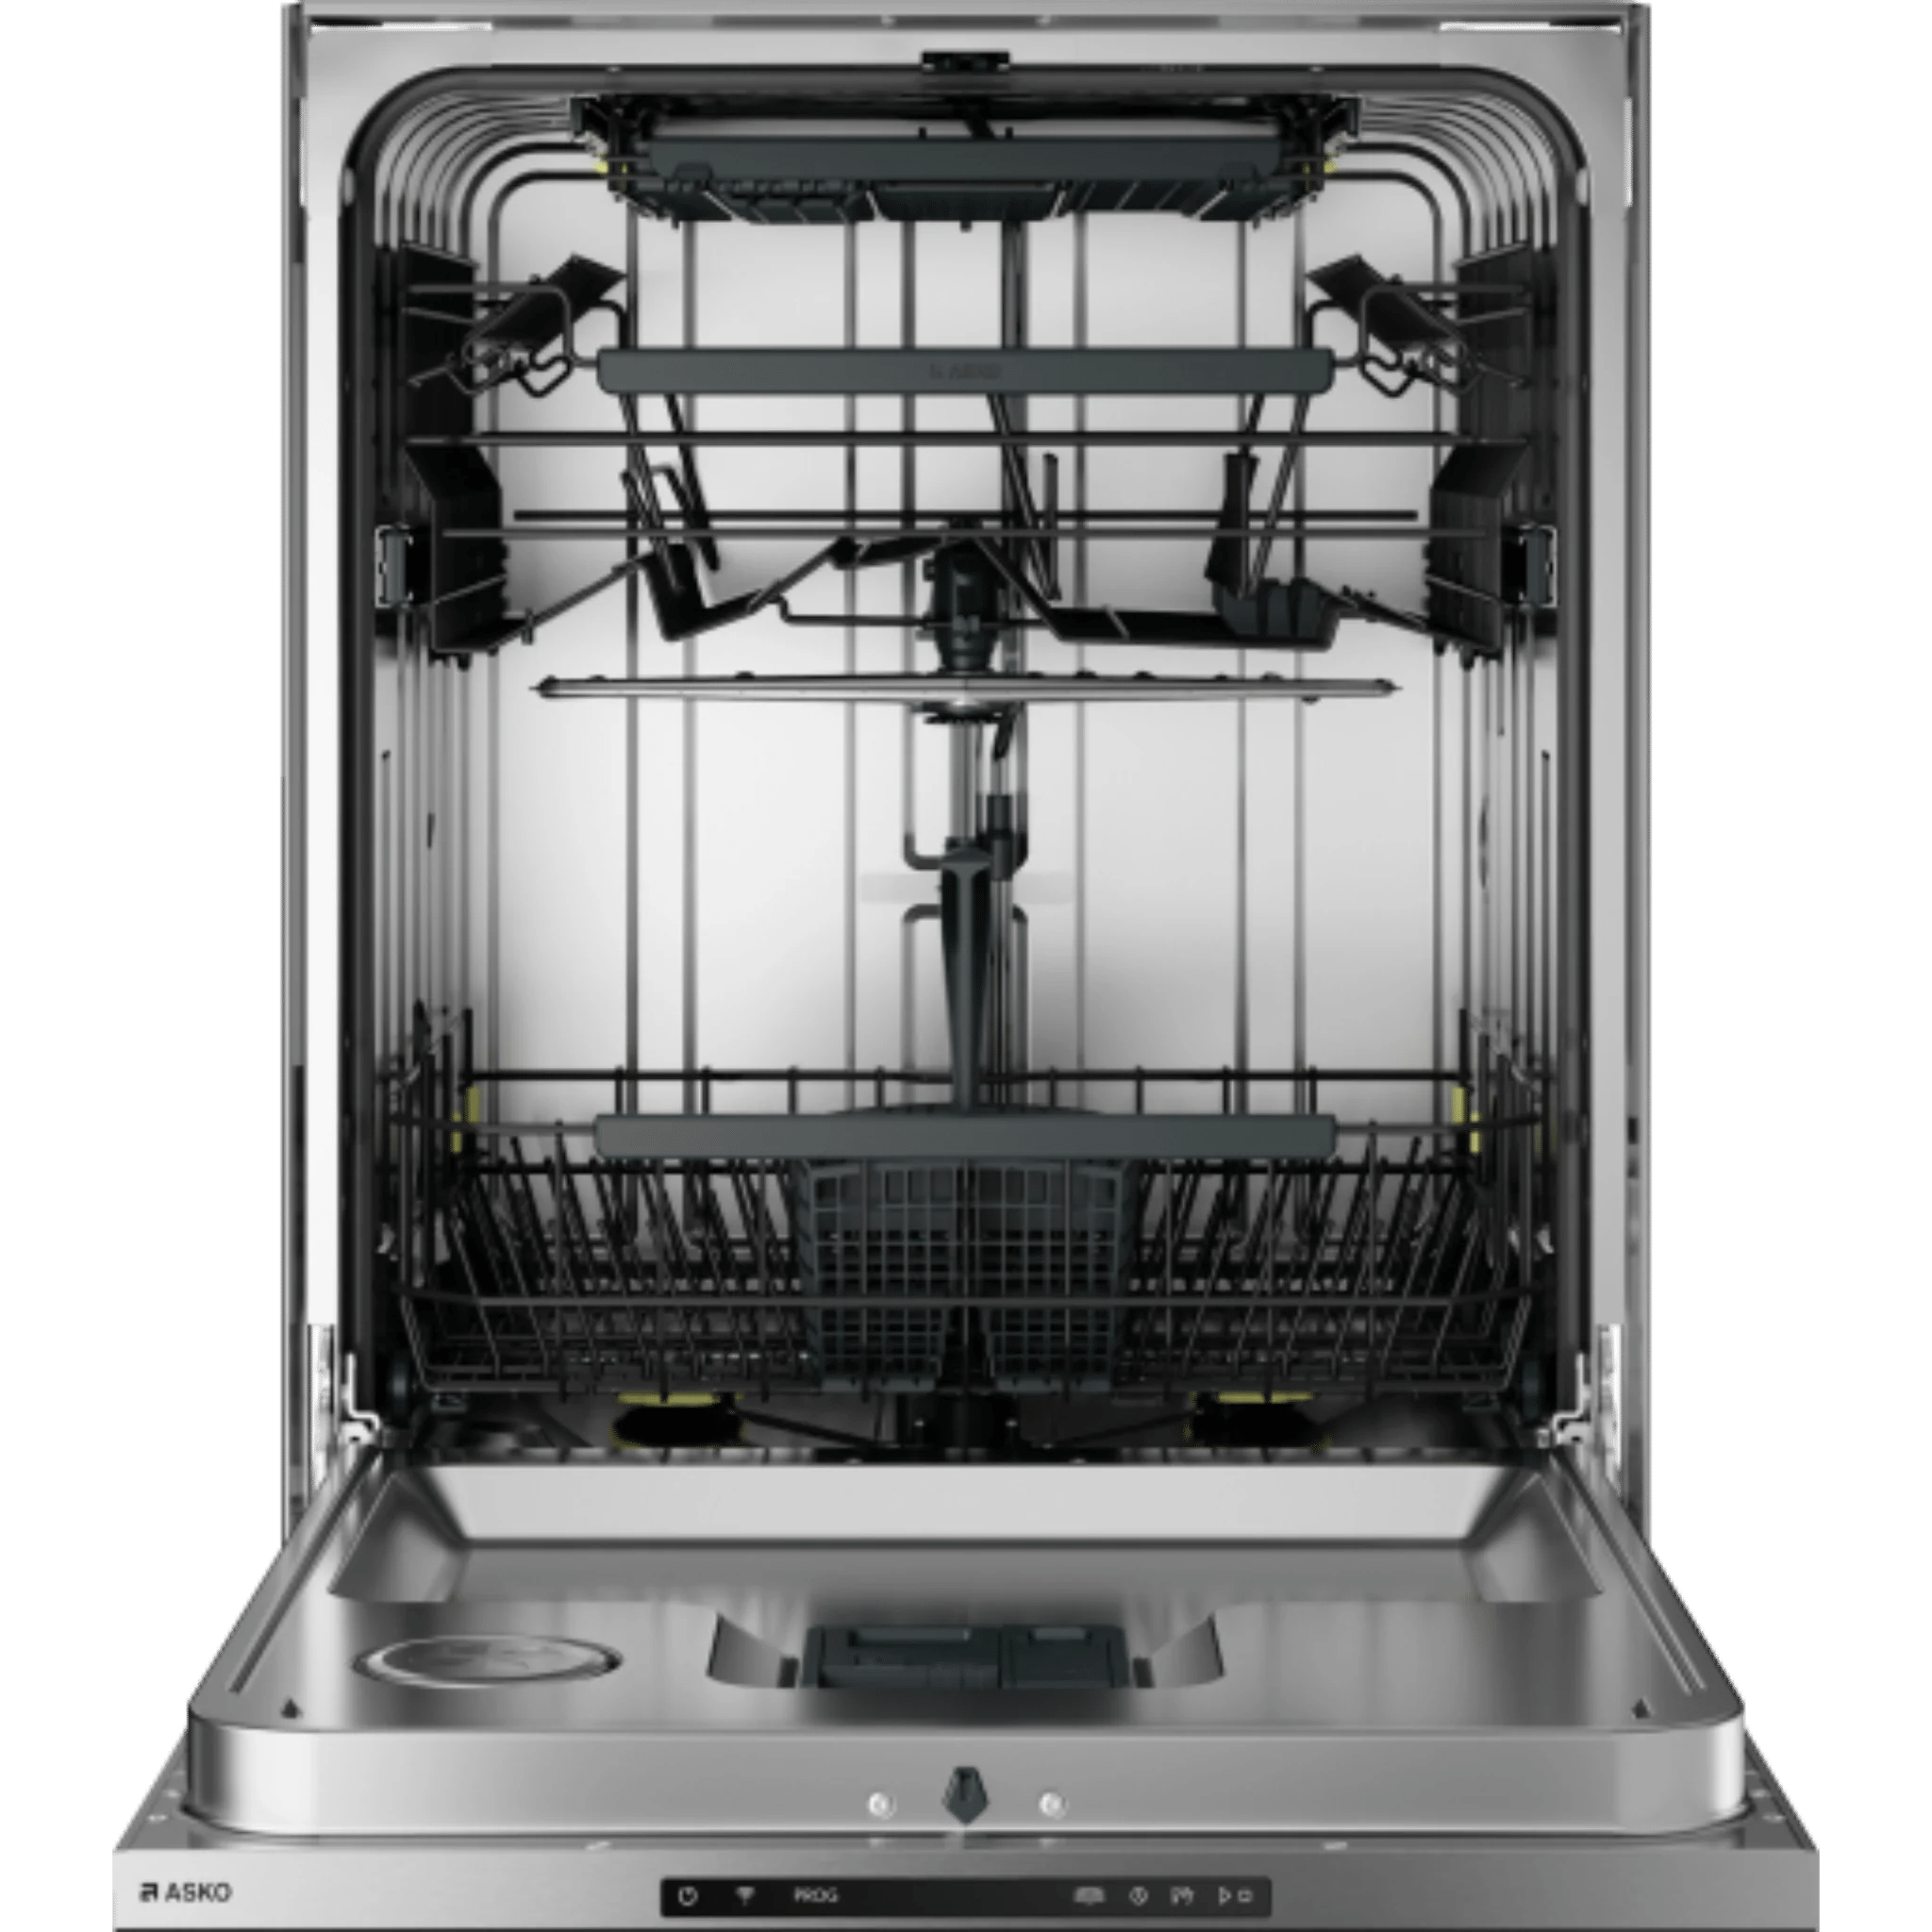 Asko Logic 24 Inch Wide 16 Place Setting Built-In Top Control Dishwasher with Pocket Handle, Turbo Combi Drying™, and Auto Door Open Drying™ Dishwashers DBI564IS Luxury Appliances Direct